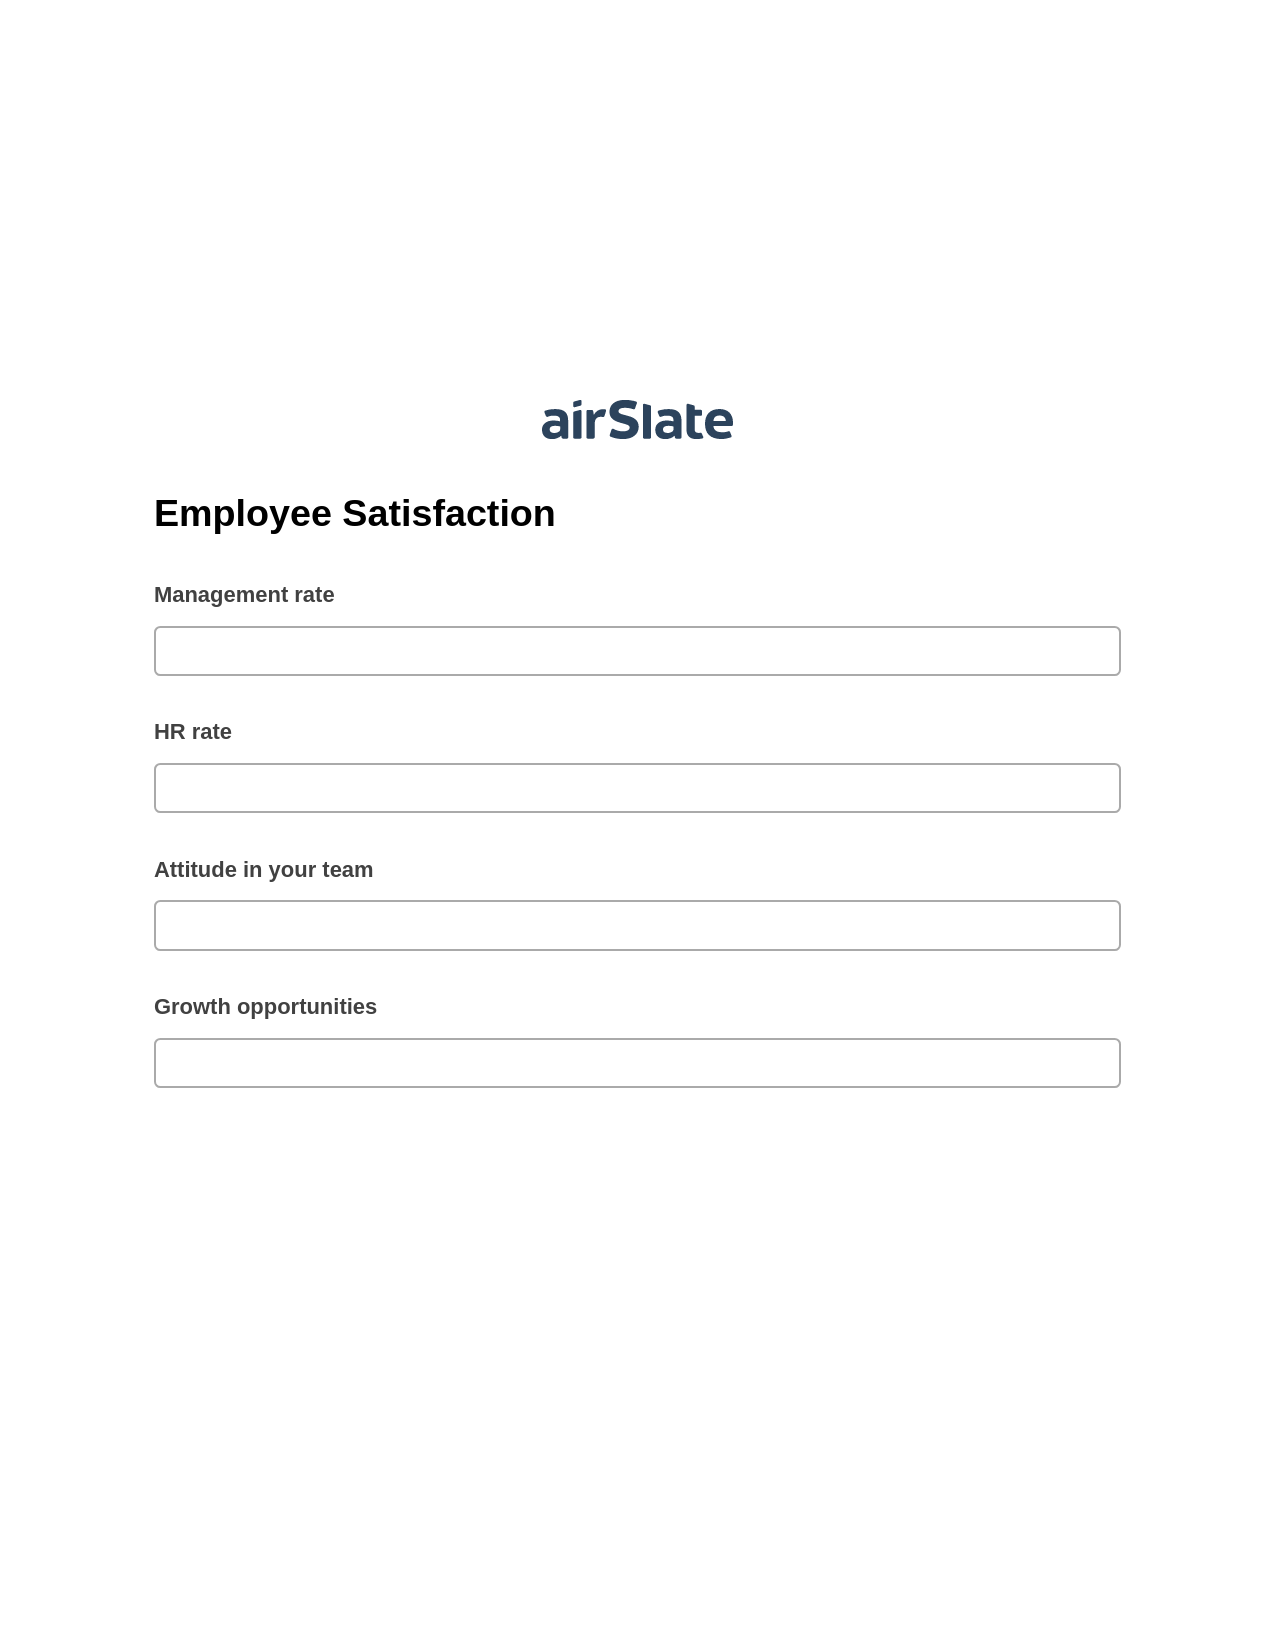 Multirole Employee Satisfaction Pre-fill from CSV File Bot, Create NetSuite Records Bot, Export to Formstack Documents Bot